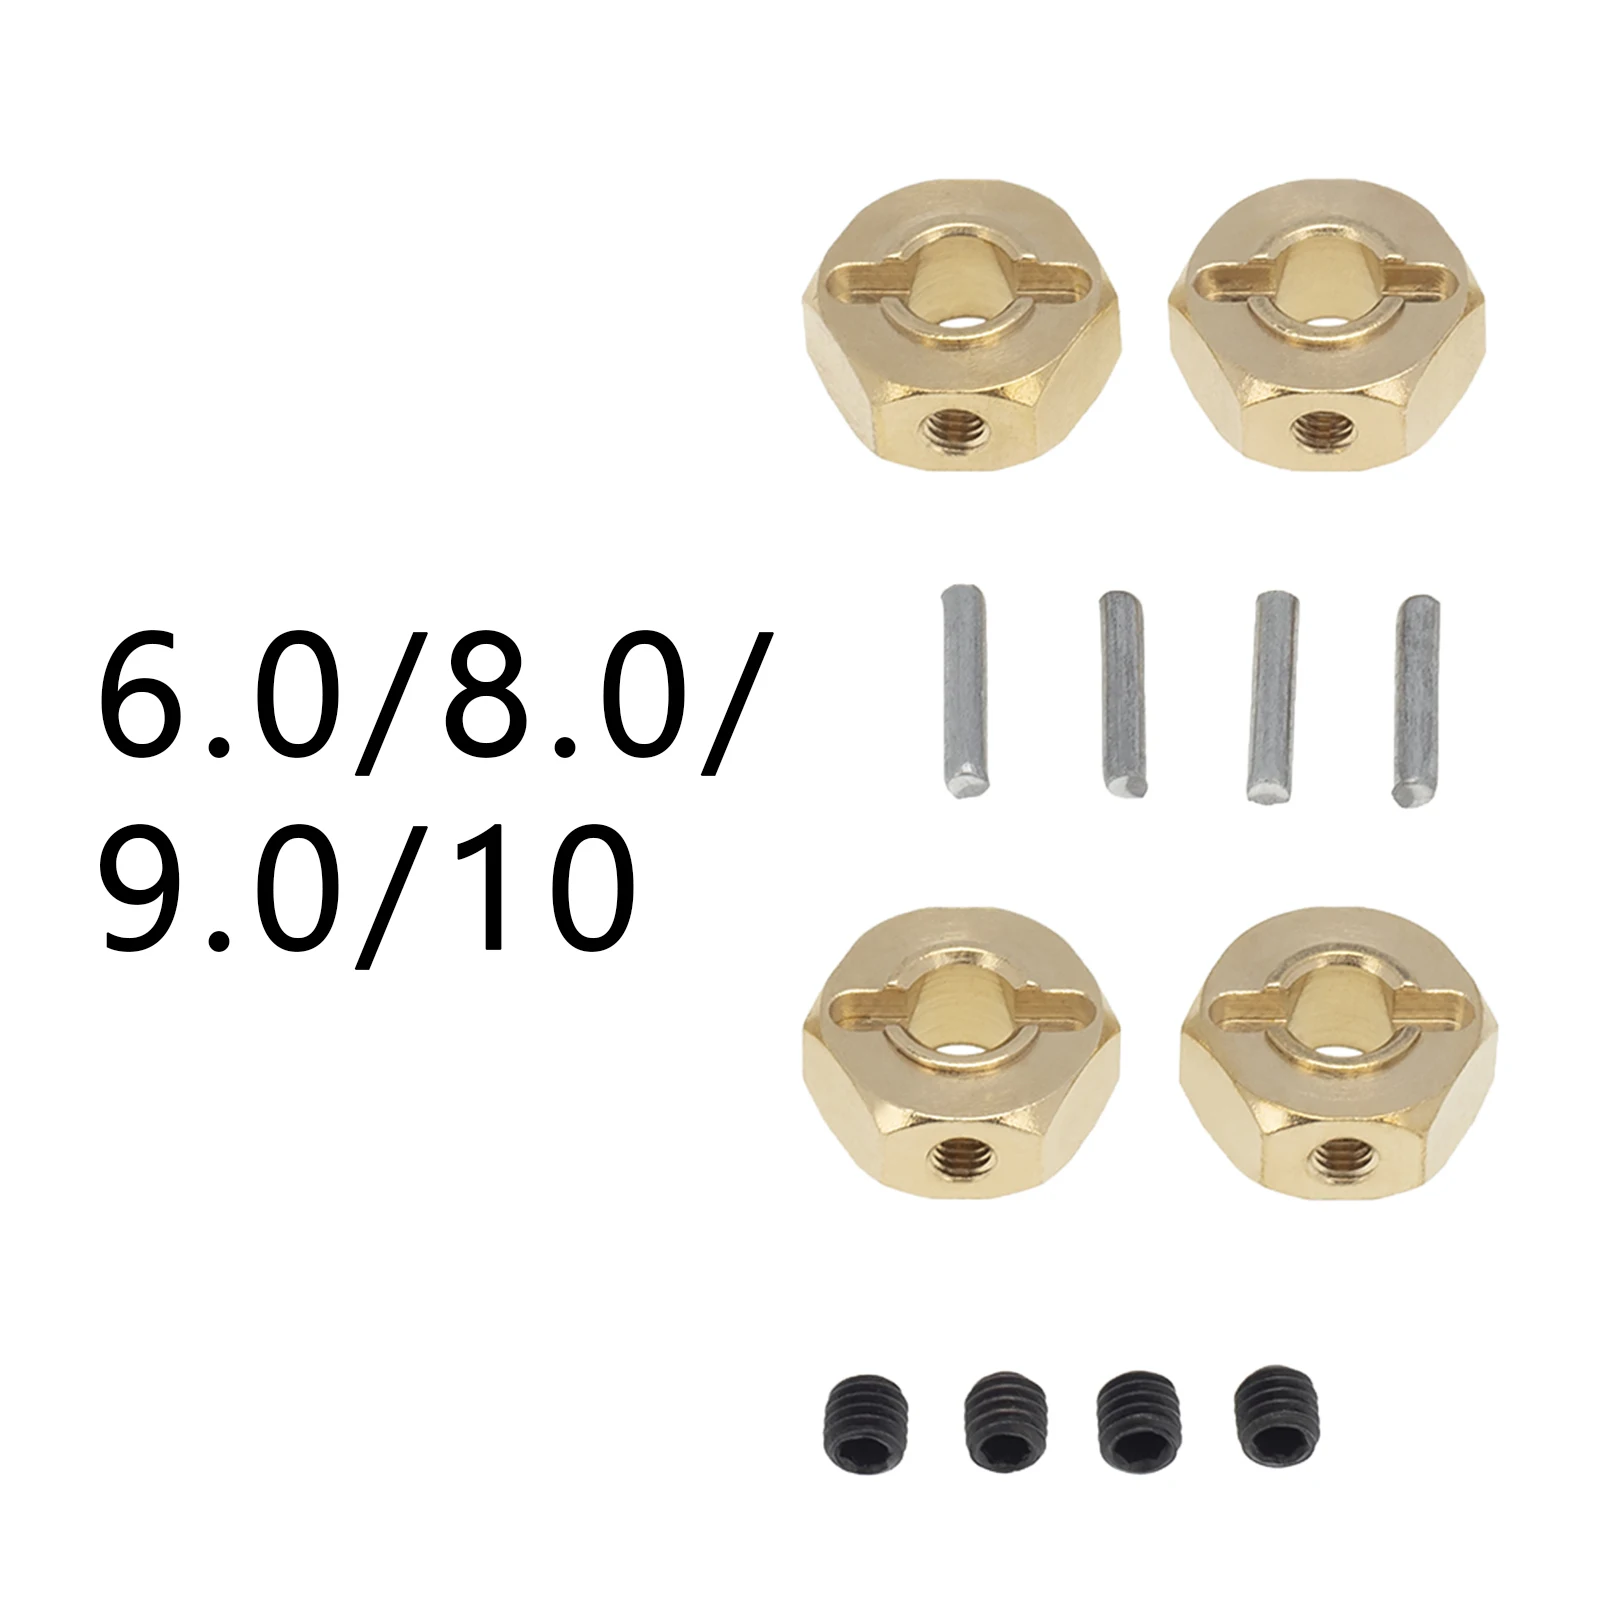 12mm Hex Wheel Hubs Adapters for RC Rock Crawler Model Car Upgrade Parts